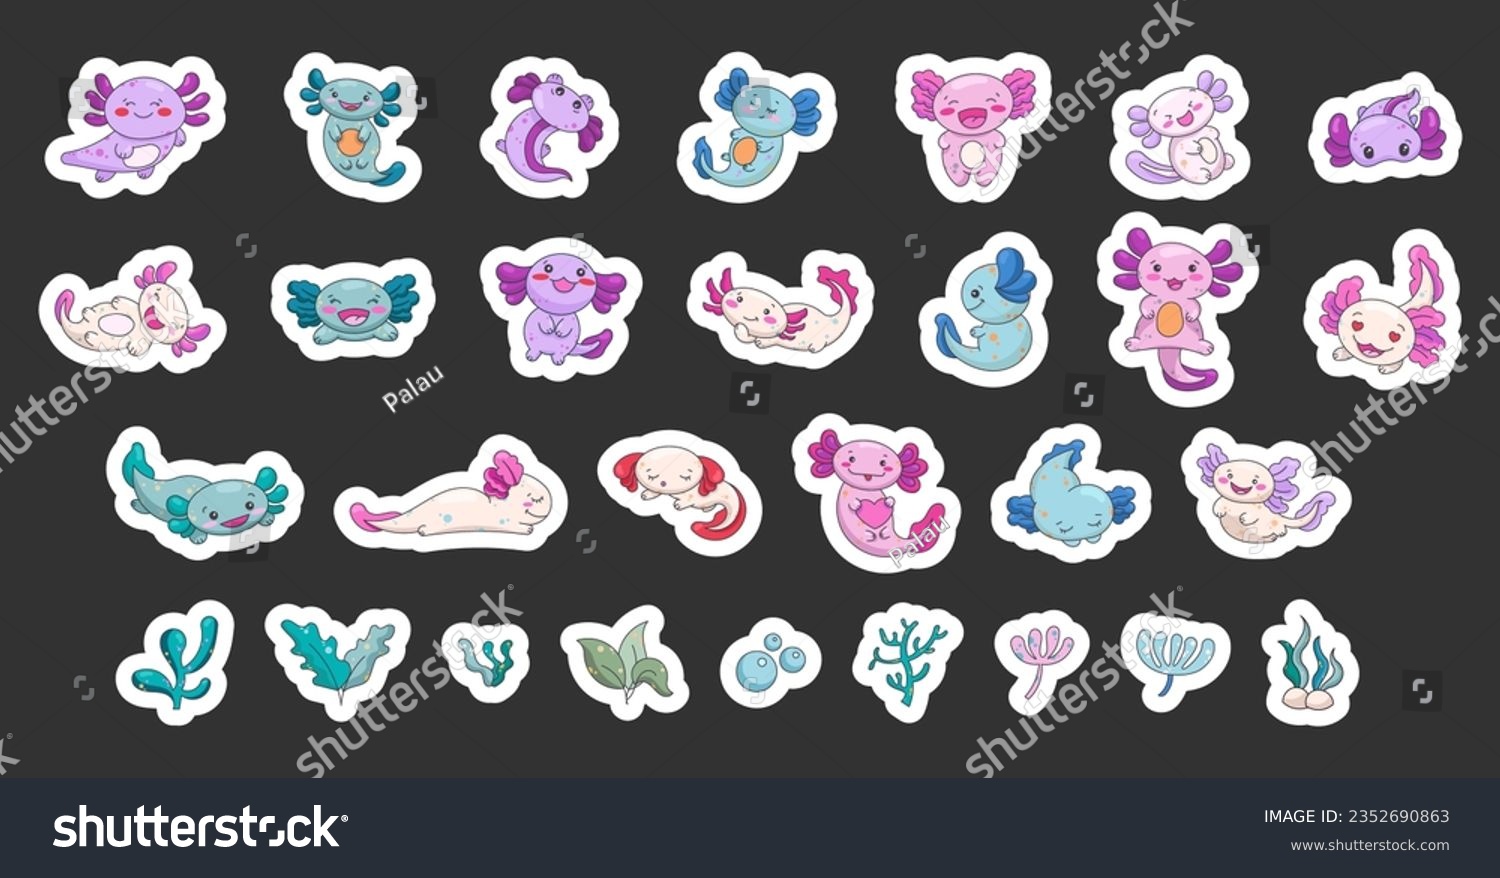 SVG of Axolotl cute kawaii character. Underwater plants and algae. Sticker Bookmark. Vector illustration. Collection design elements. svg